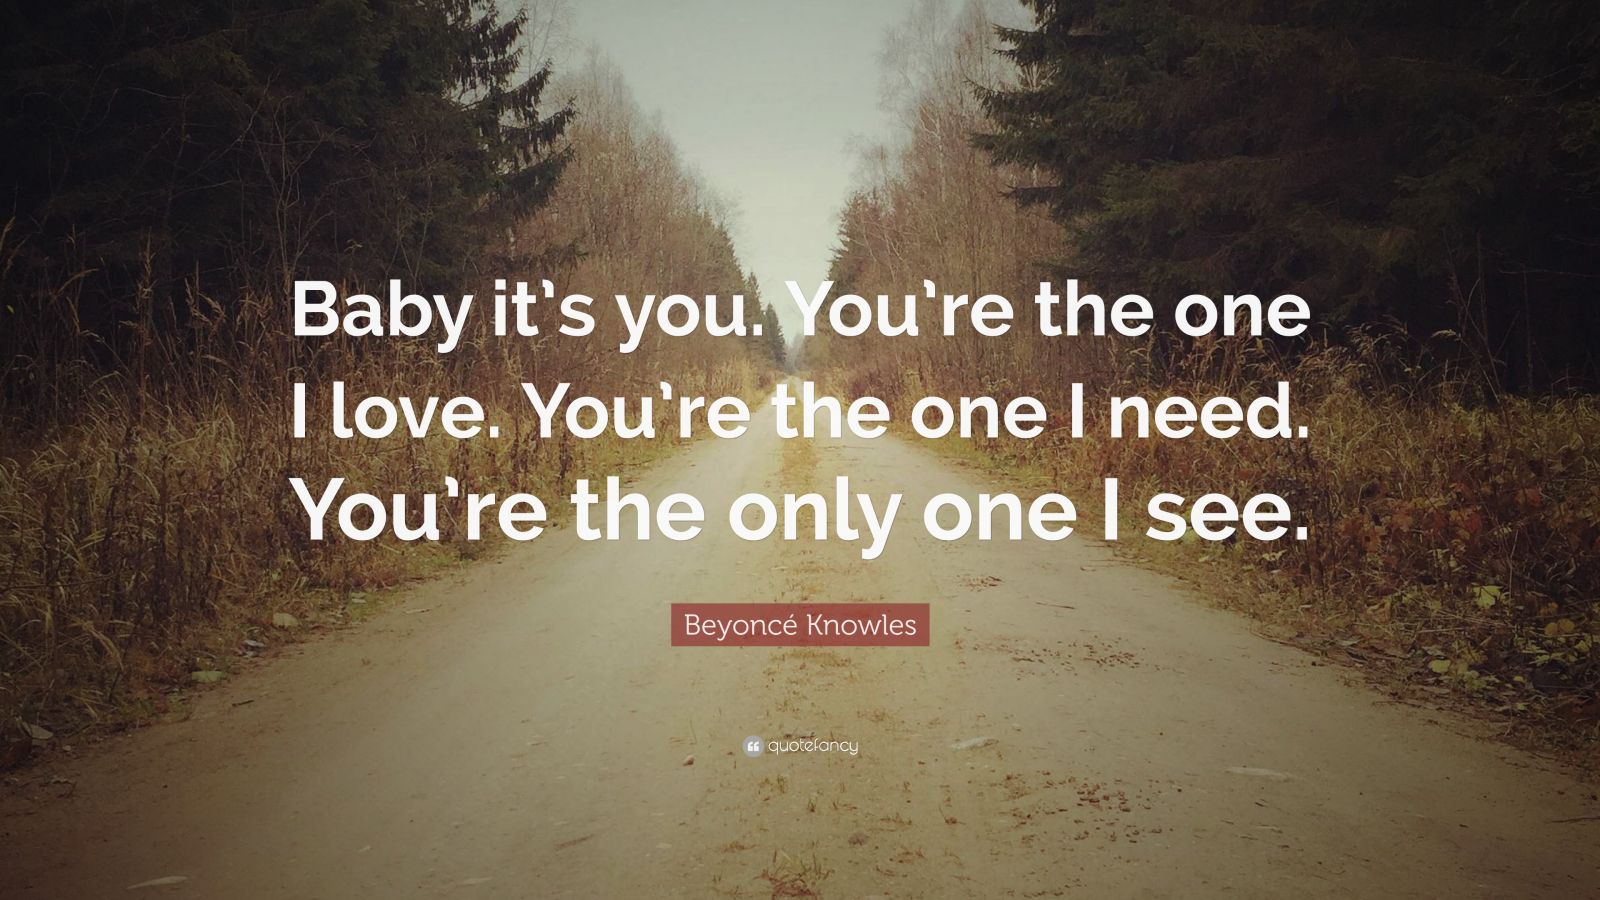 Beyoncé Knowles Quote: “Baby it’s you. You’re the one I love. You’re ...